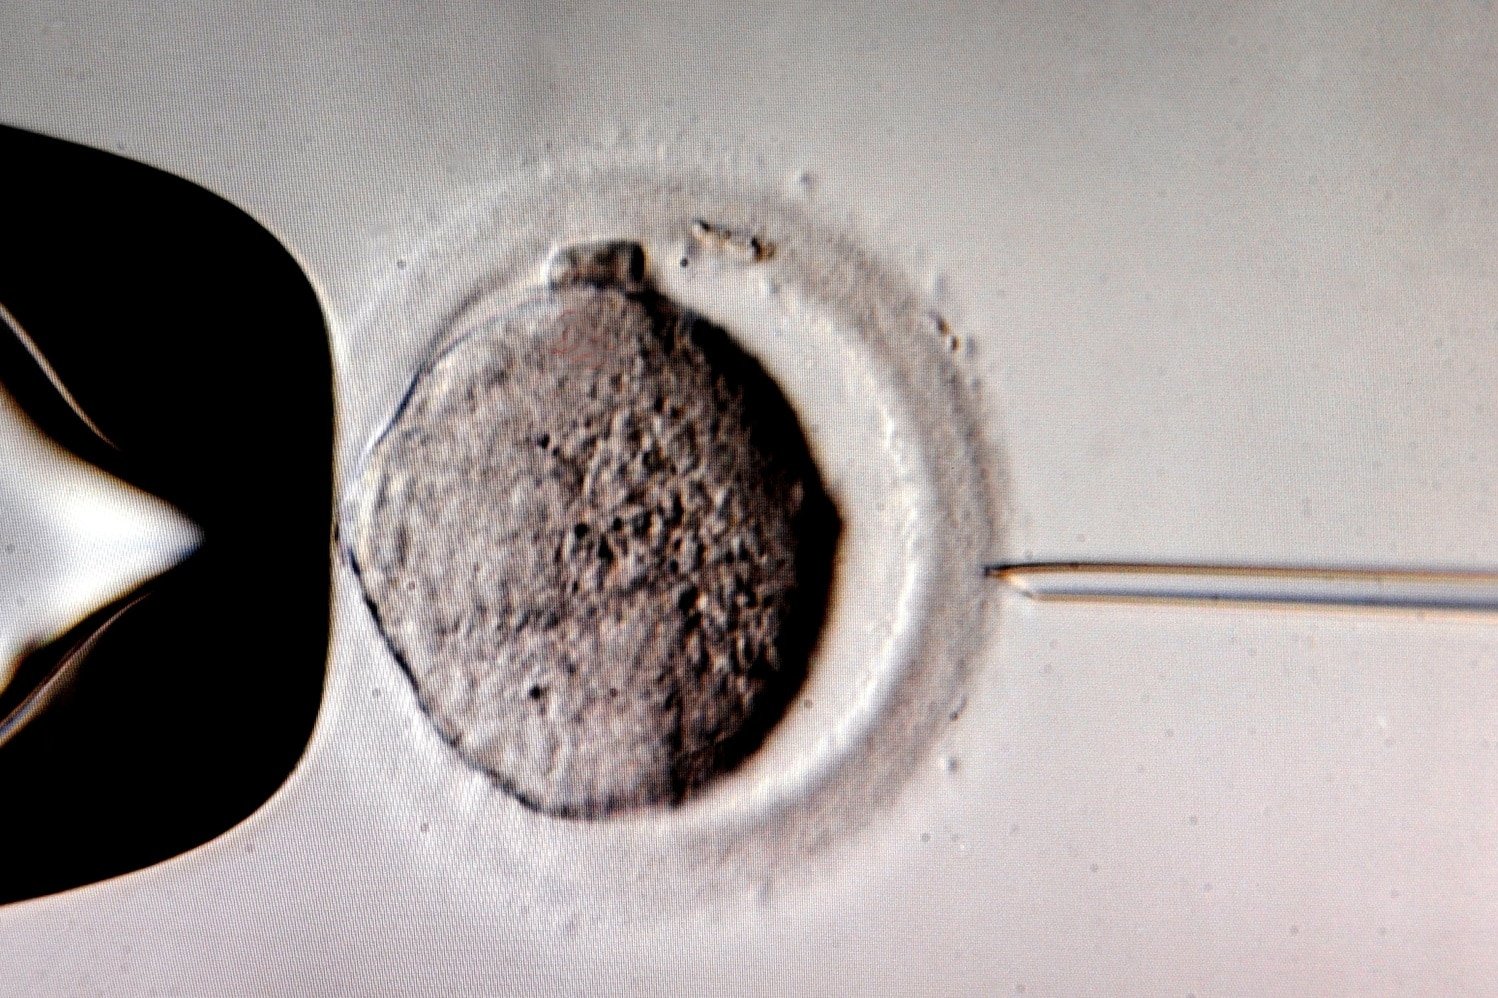 A monitor shows the microinjection of sperm into an egg cell using a microscope at a Leipzig, Germany, in vitro fertilization clinic in this July 2011 photo. Photo: CNS/EPA